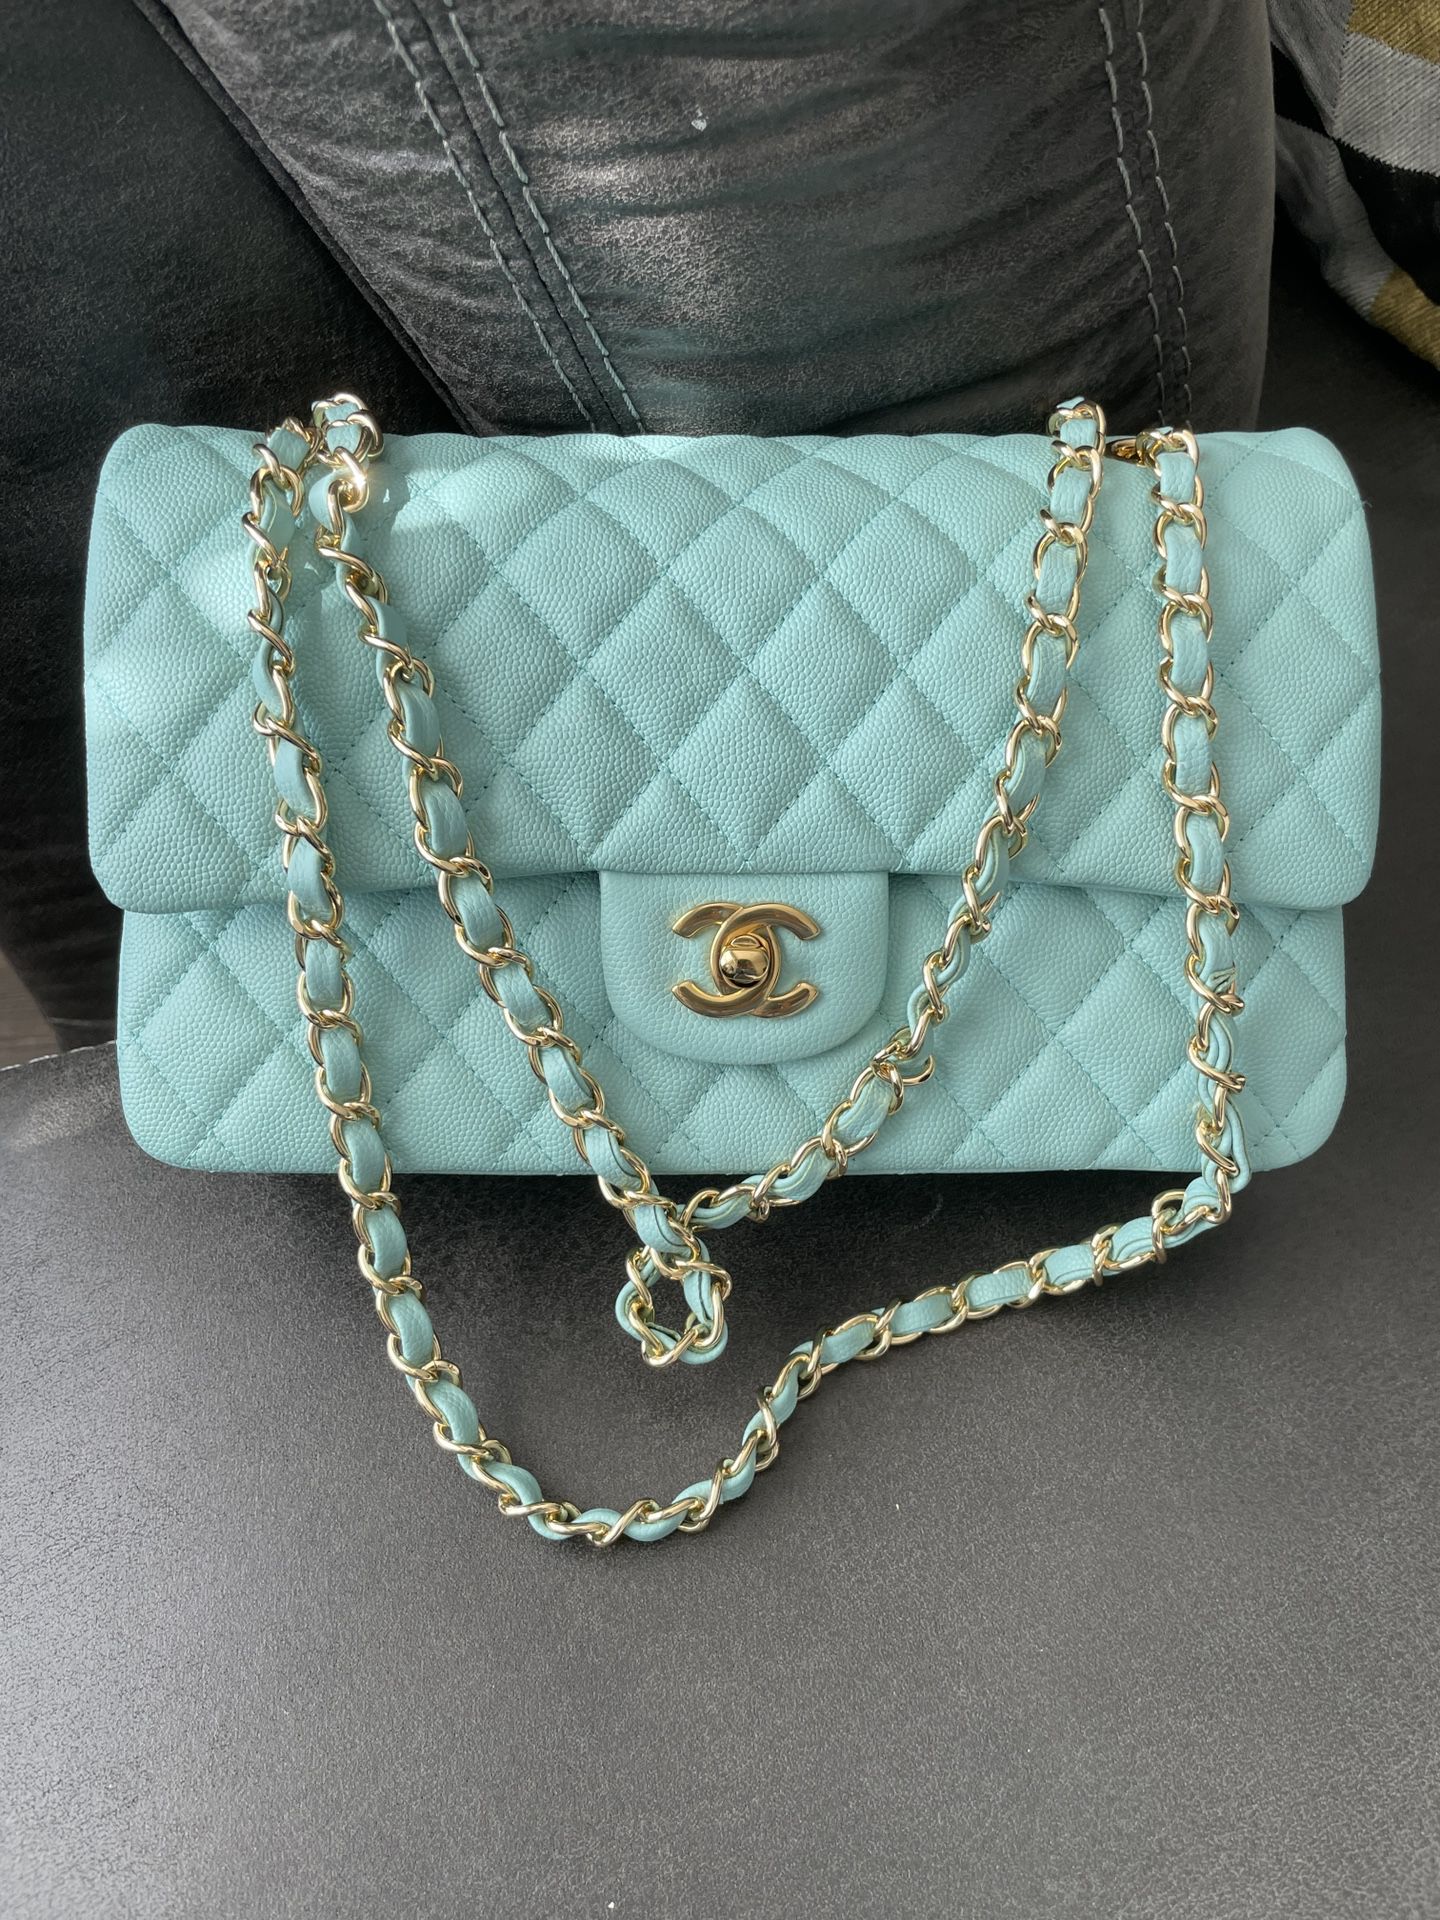 blue and gold chanel